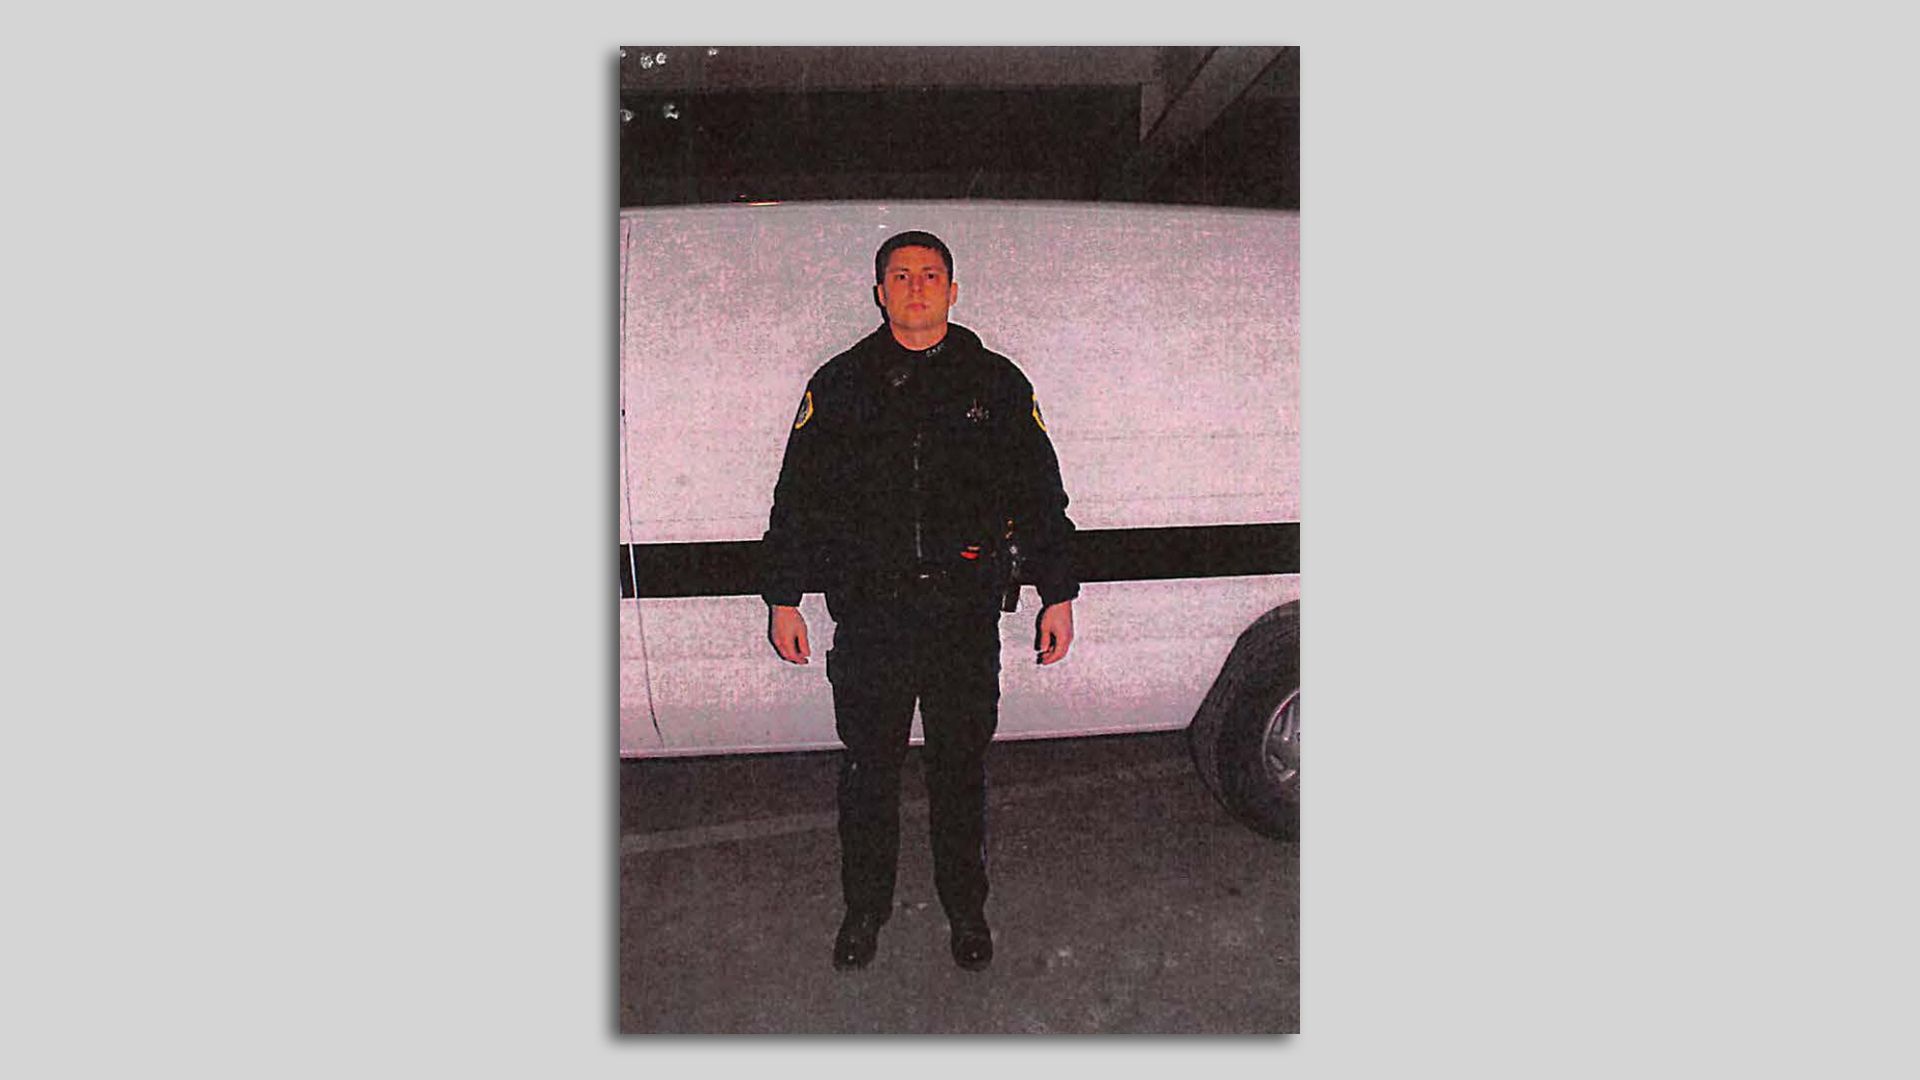 An image of Sgt. Michael Fong from a court document in 2013.